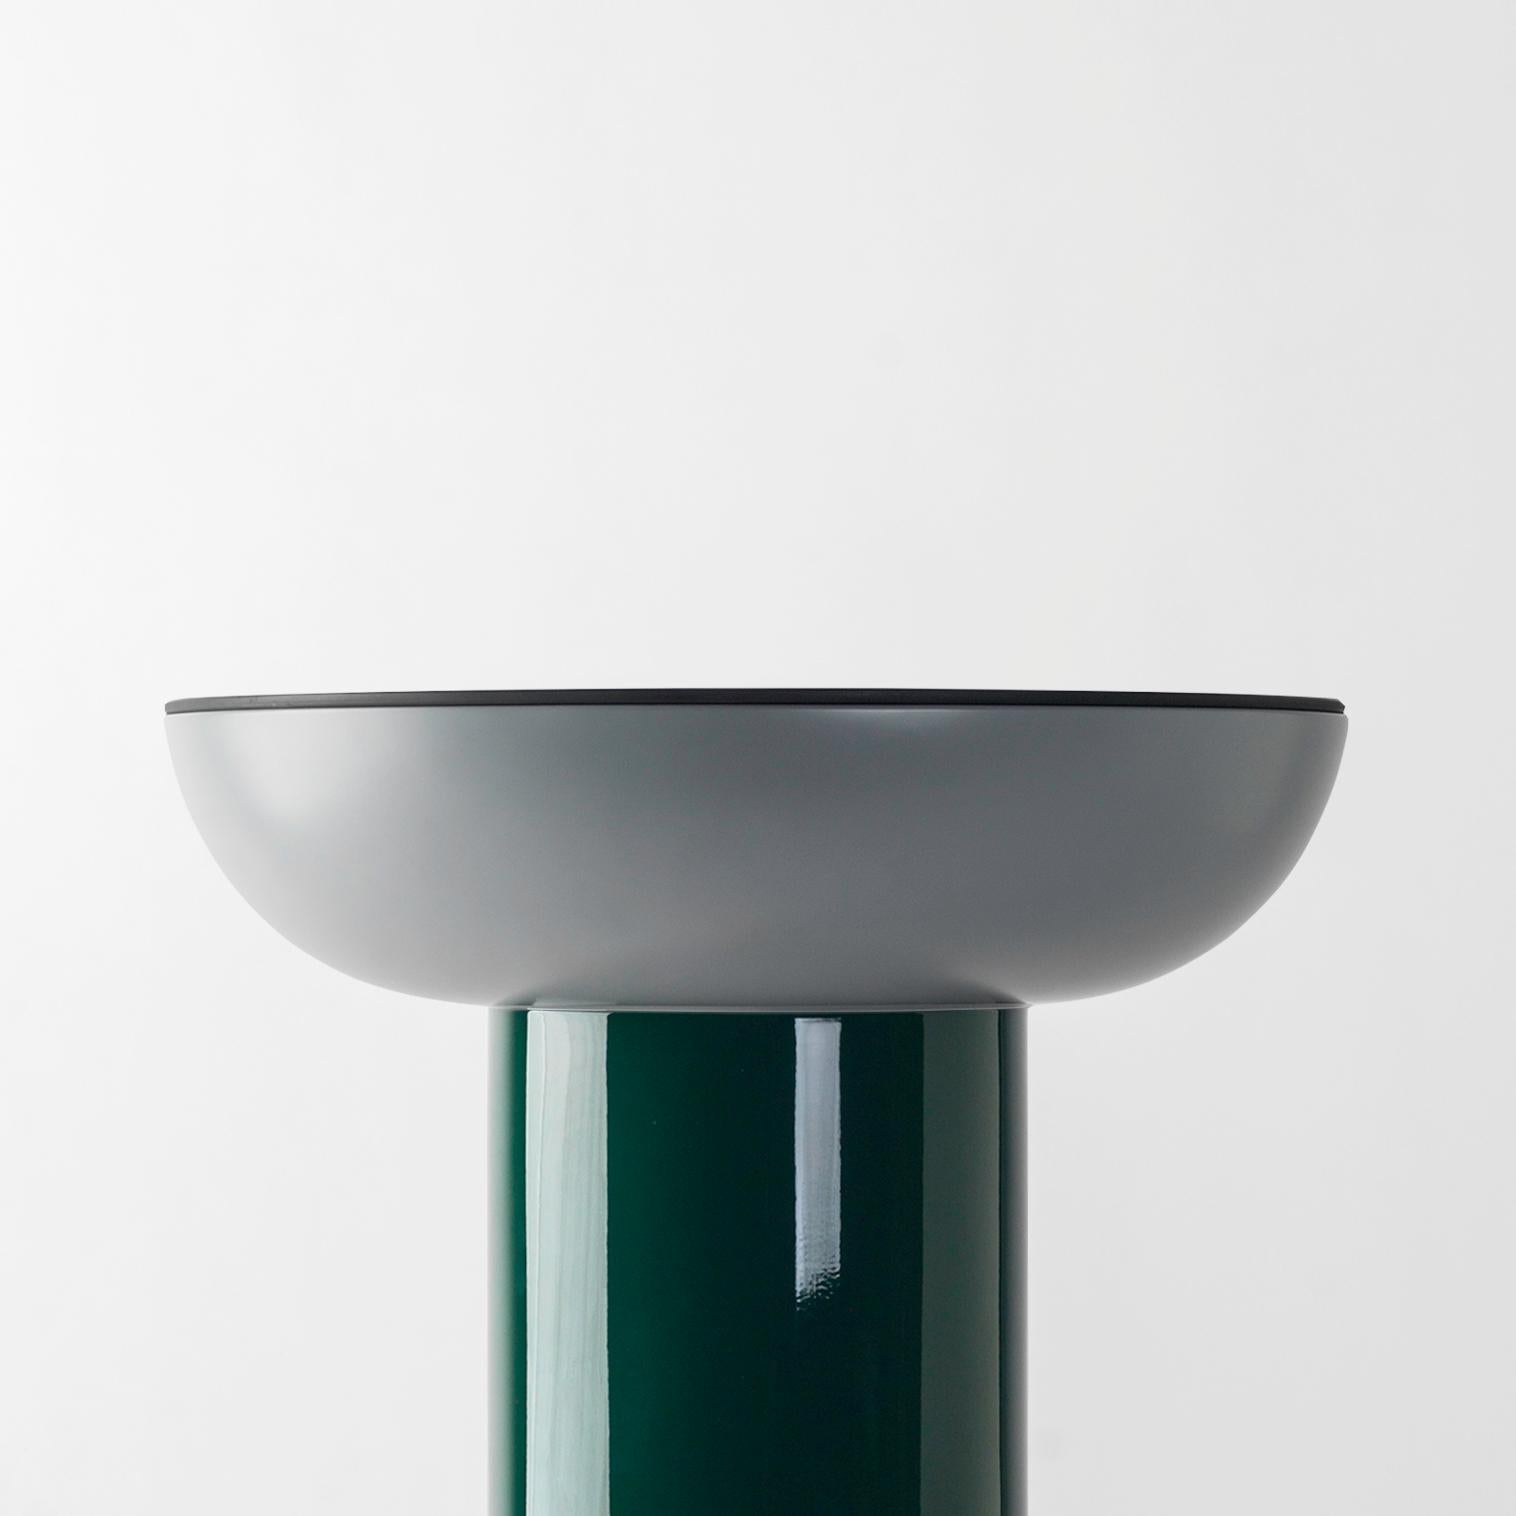 Multicolor explorer #01 Table

Design by Jaime Hayon, 2019
Manufactured by BD Barcelona.

Laquered fibreglass body. Solid turned wooden legs and lacquered. Painted glass tabletop.

40 Ø x 50 cm

- Glass: RAL 7021
- Top: RAL 6005 Mate
-